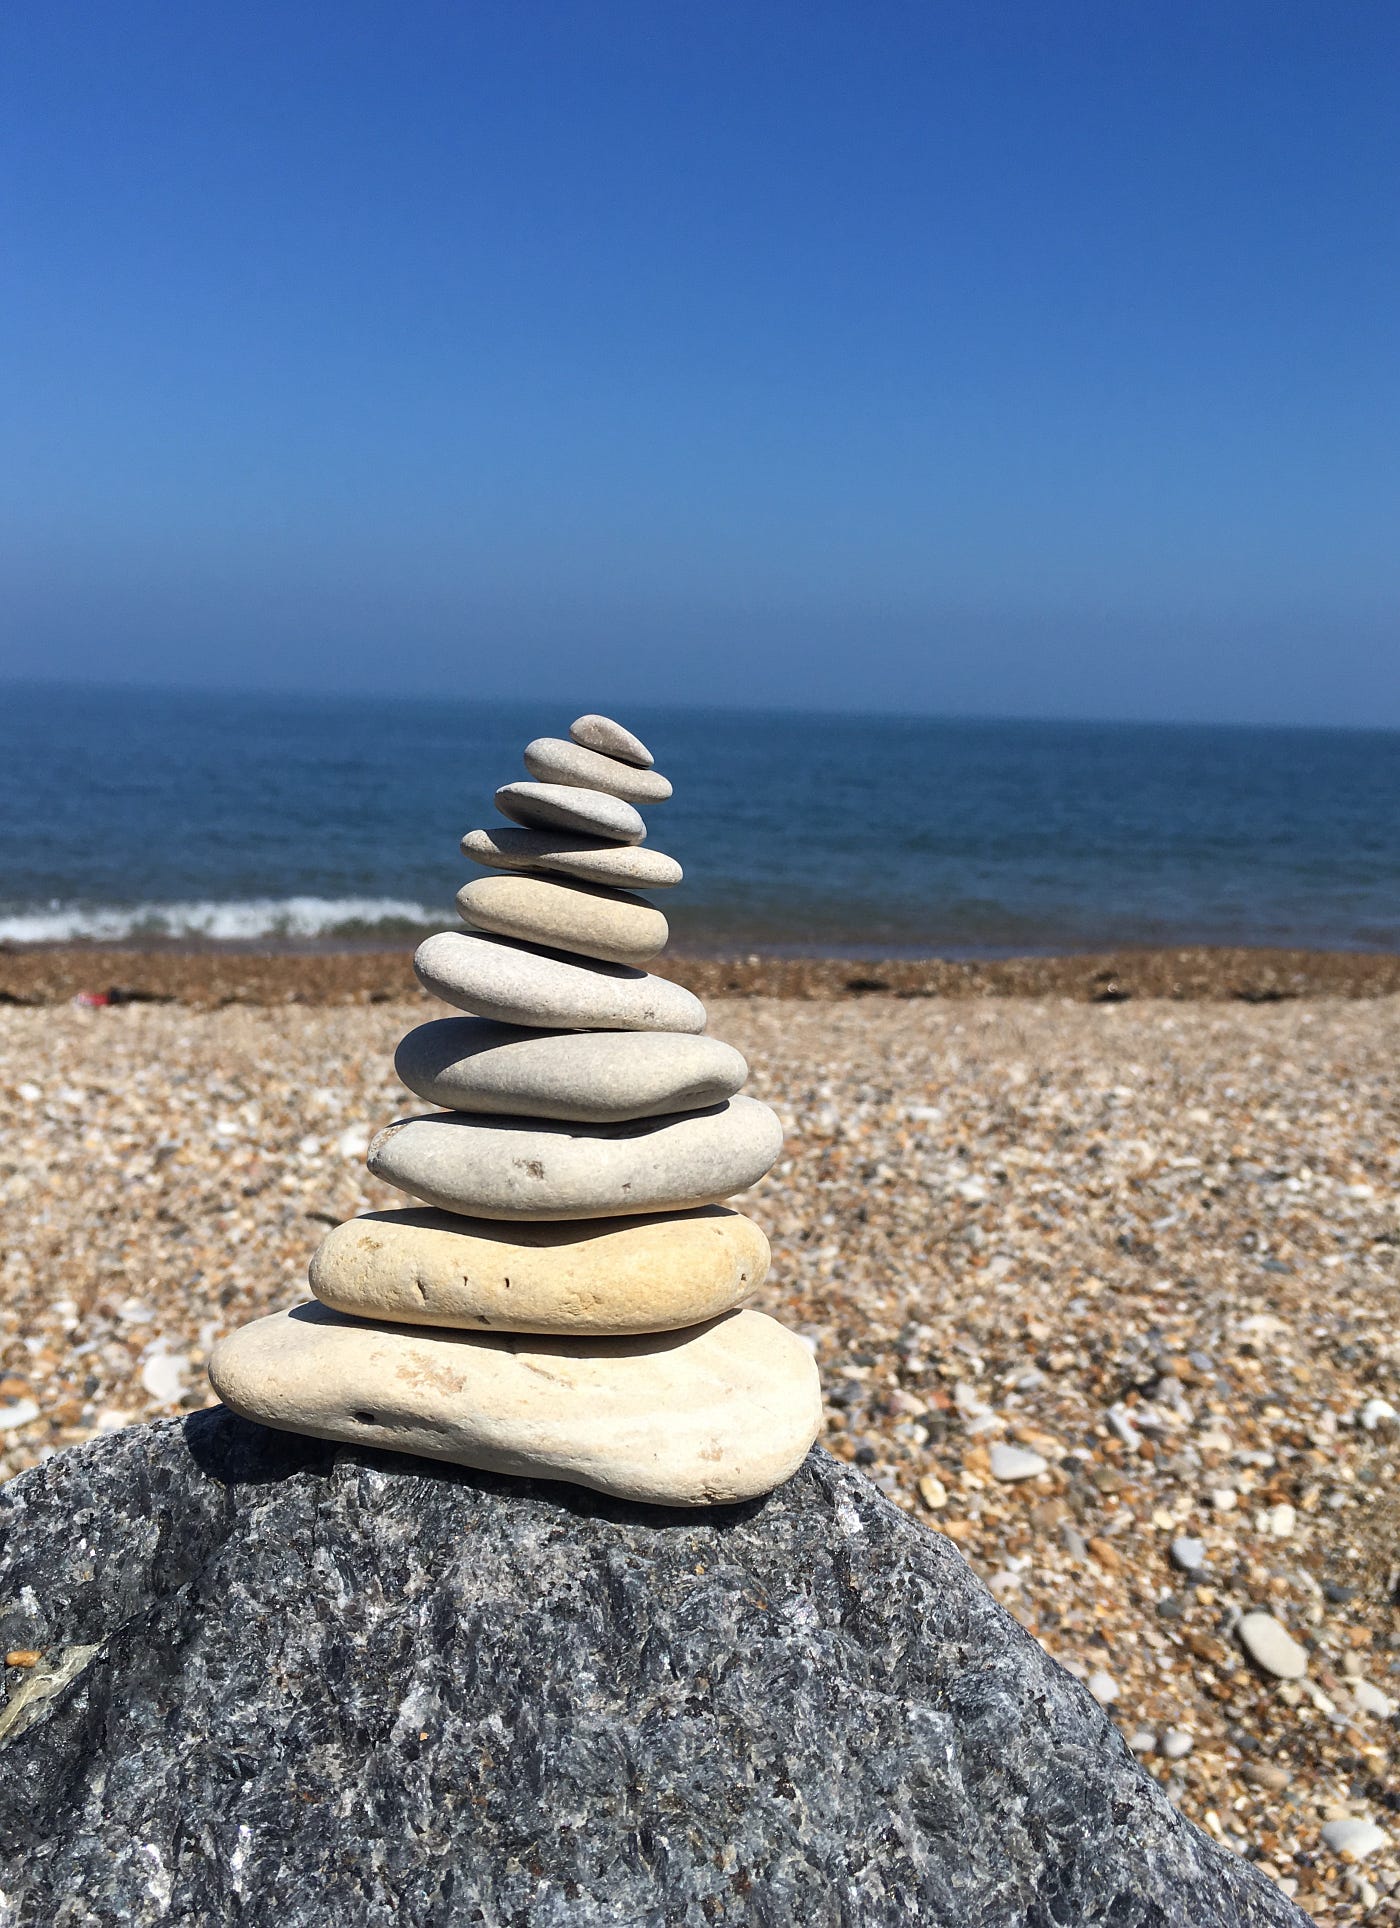 81: Pebbles. Why are pebbles so wonderful? | by Katie Harling-Lee